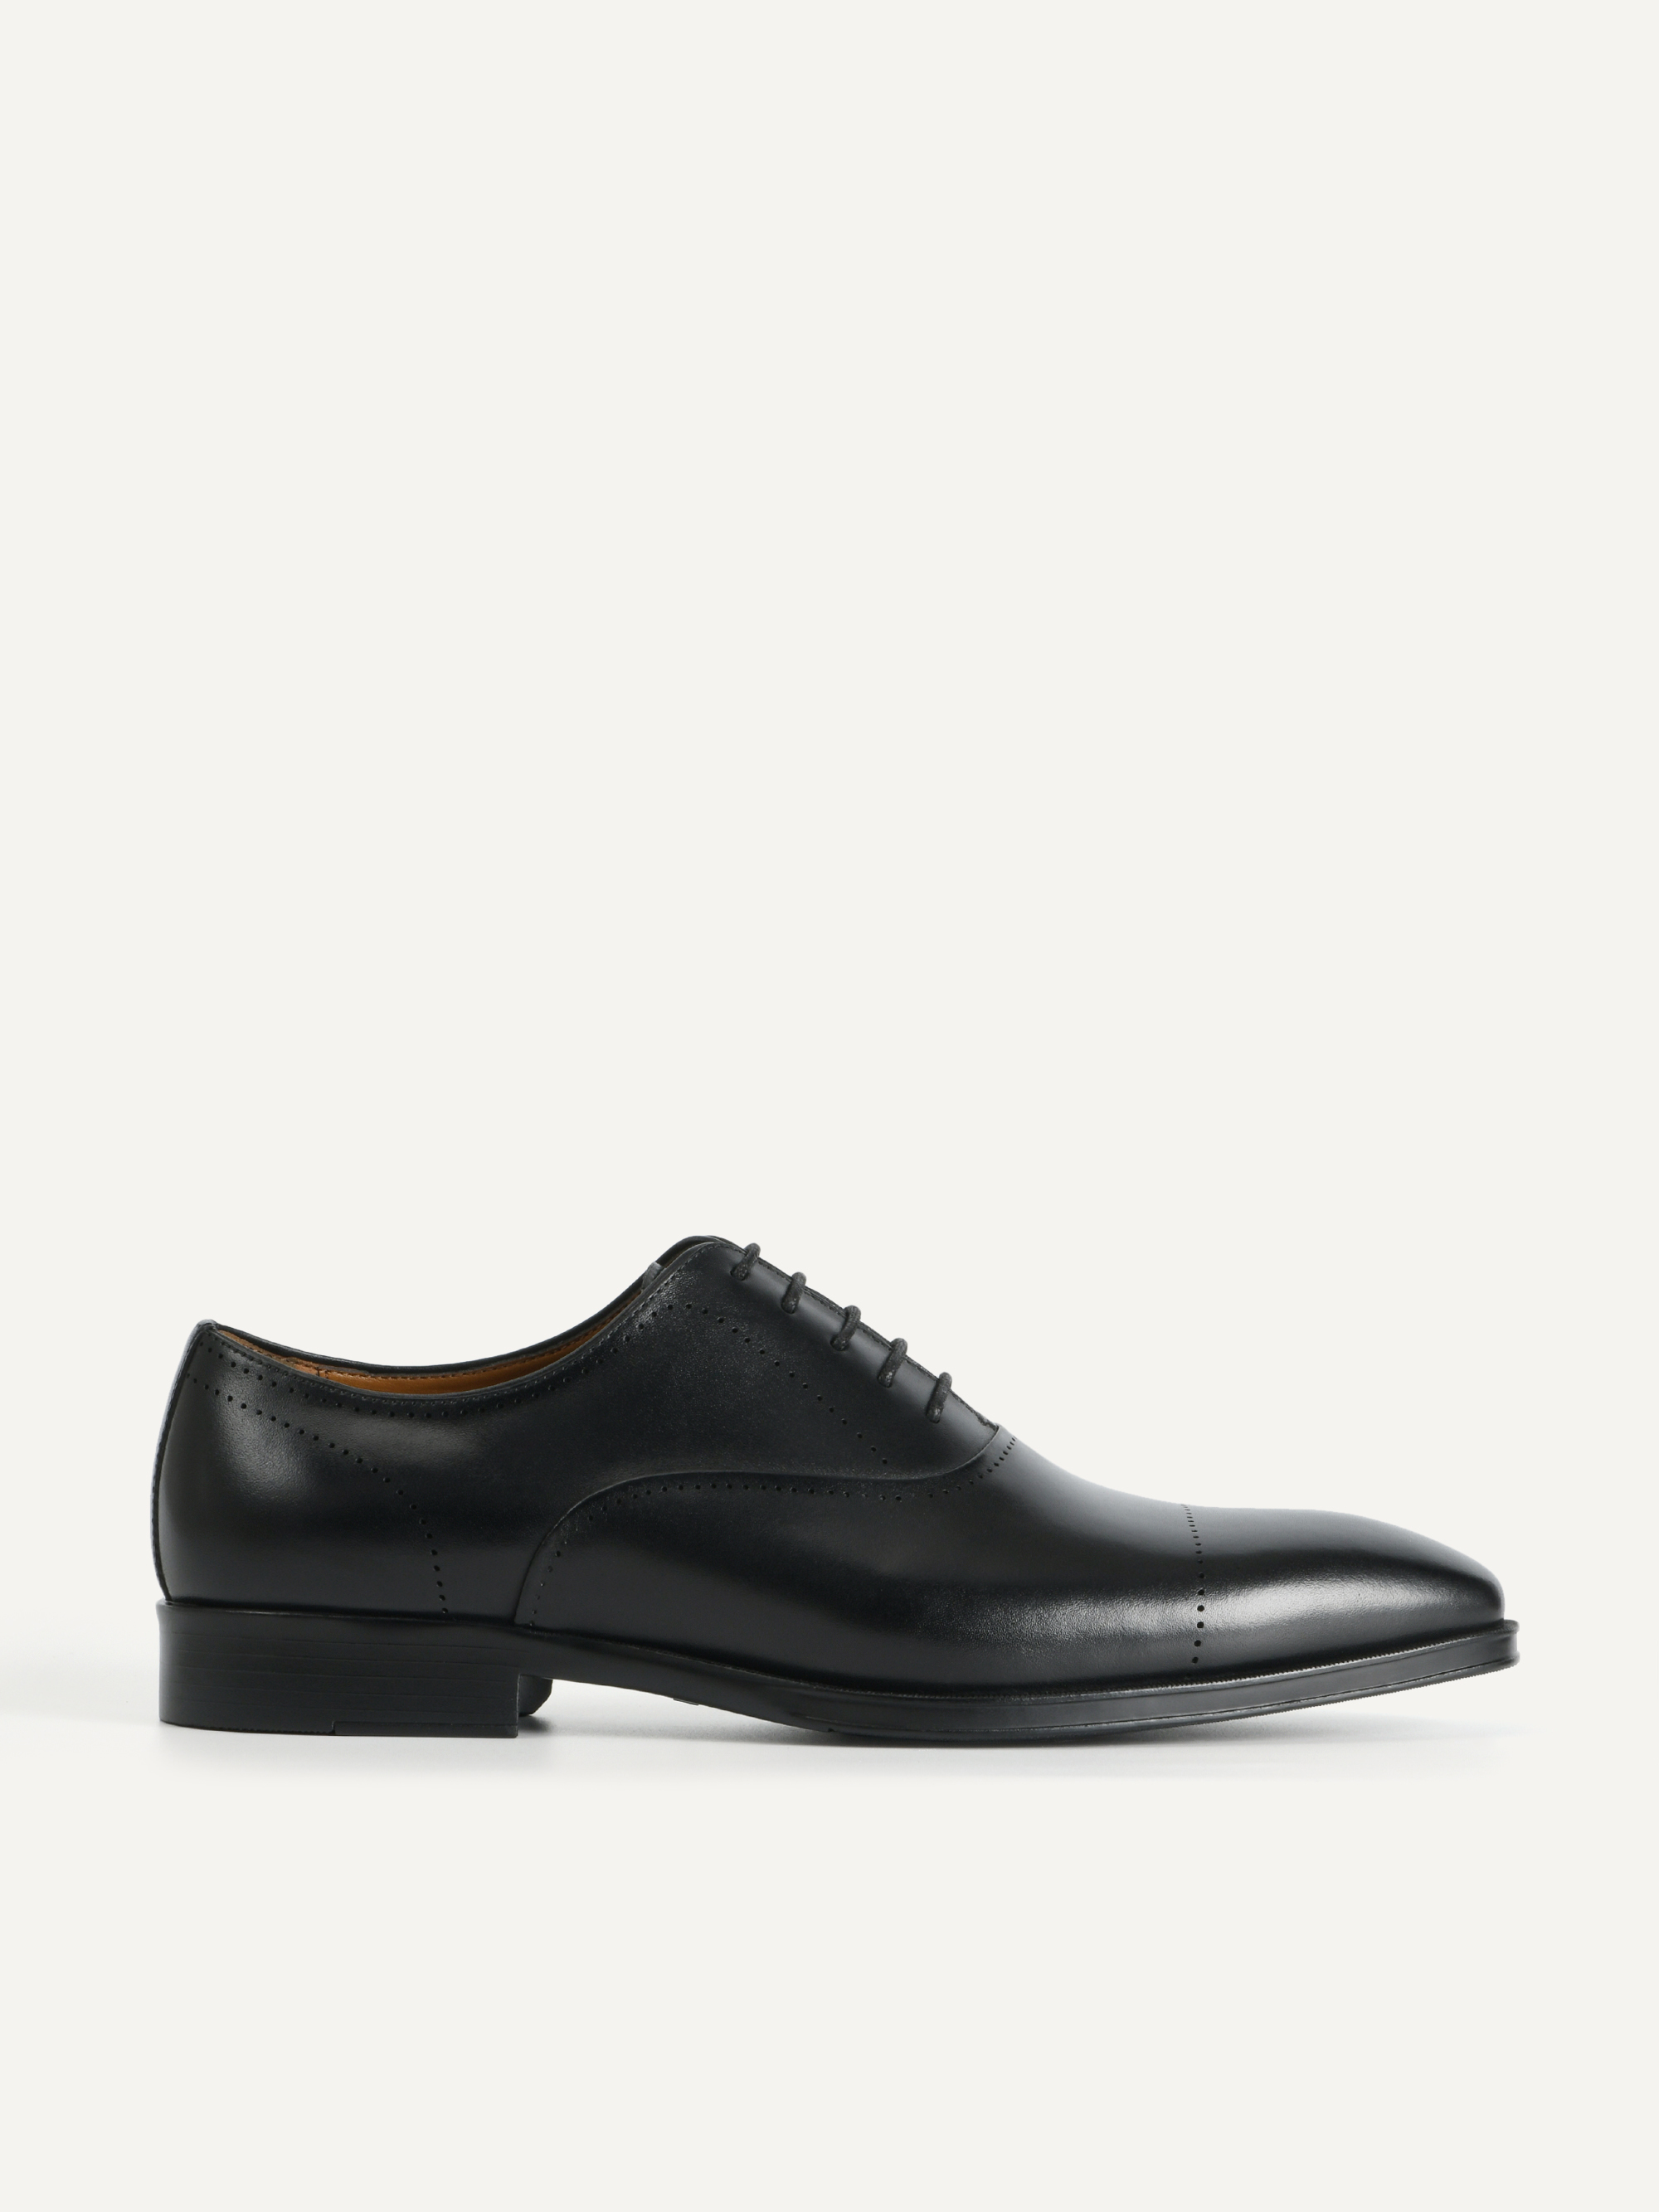 Leather Oxford Shoes - PEDRO SG